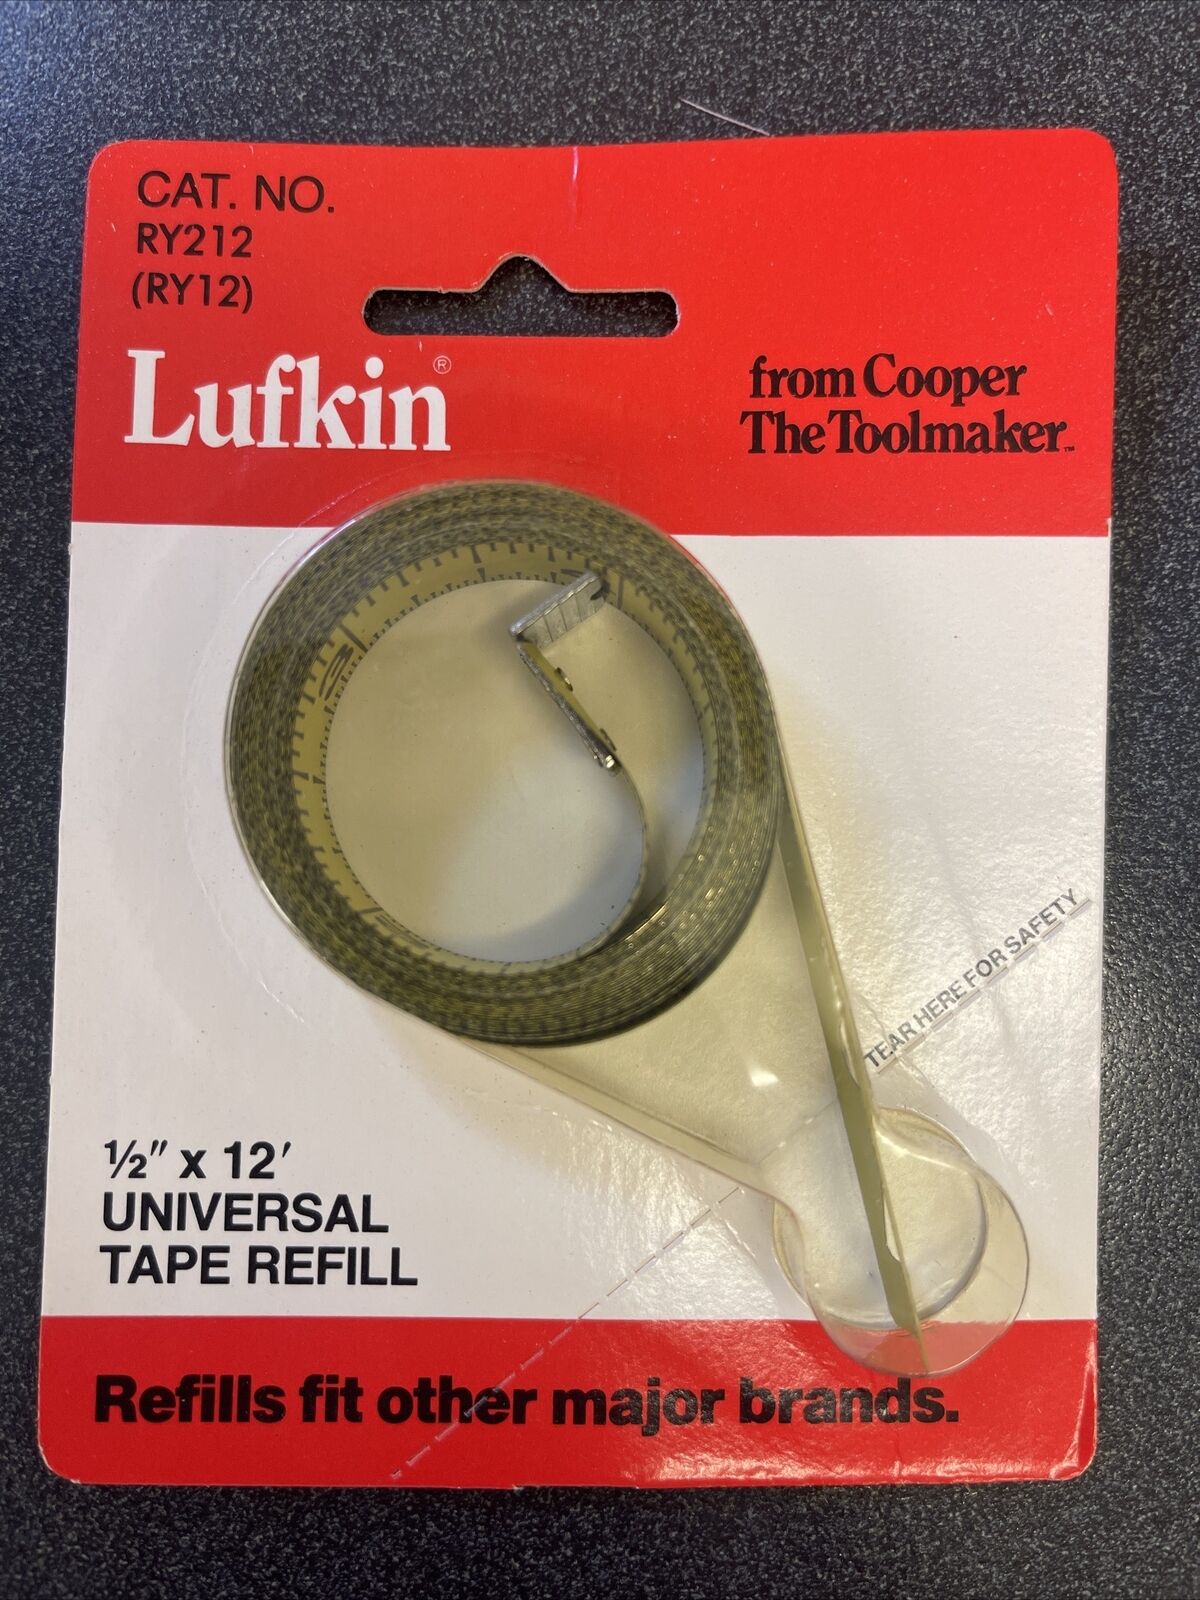 Lufkin tape measure replacement 1/2” X 12’ Universal Cat No. RY212